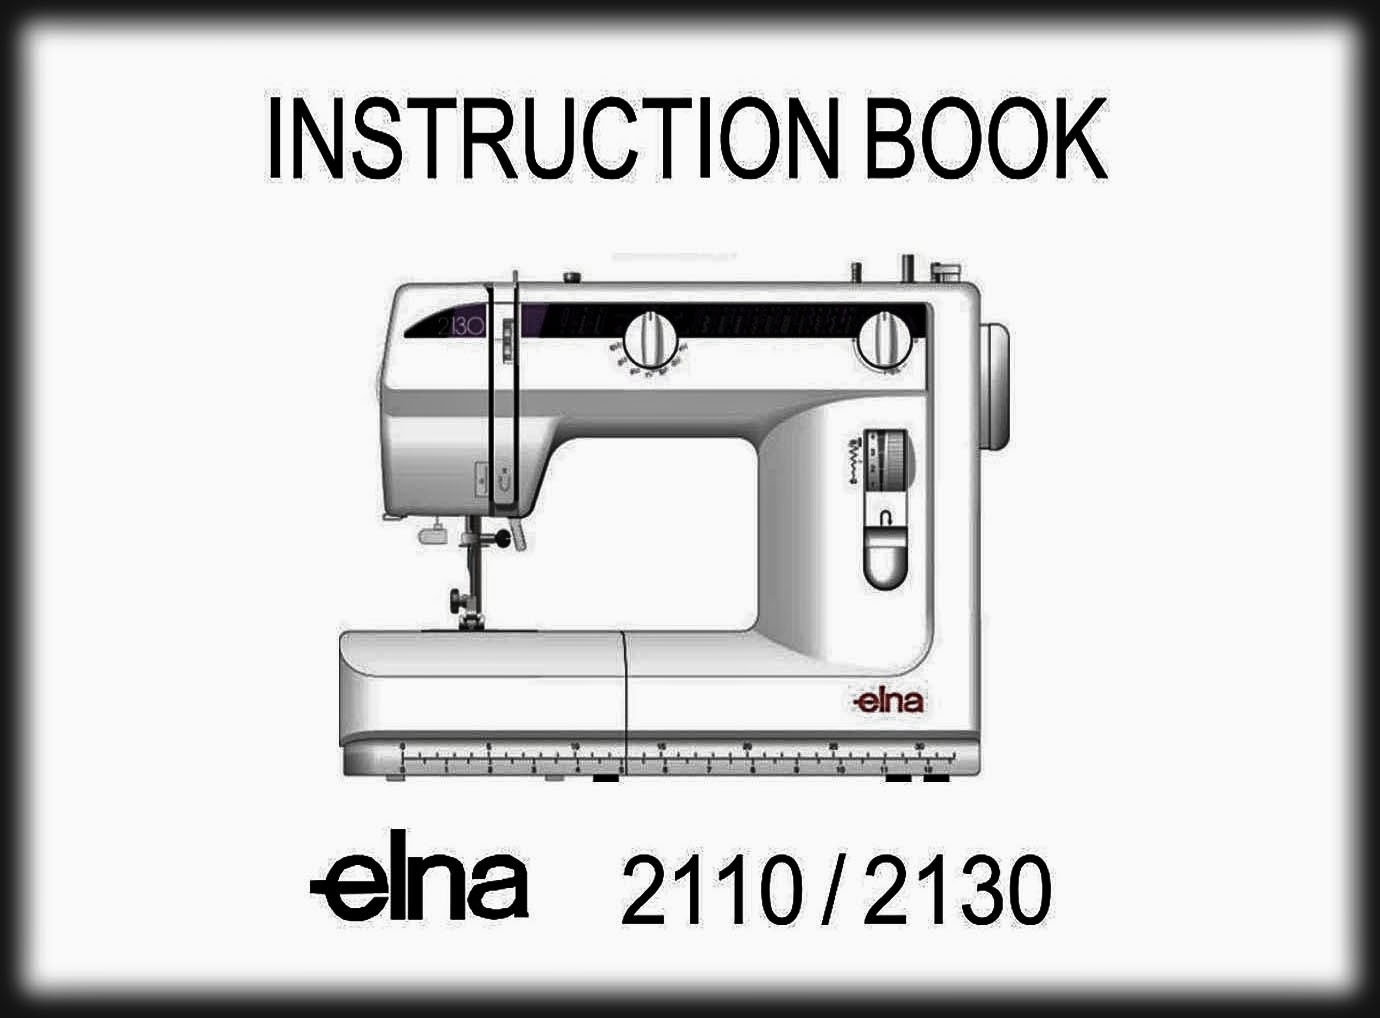 Elna eXcellence 580+ Computerized Sewing Machine : Sewing Parts Online